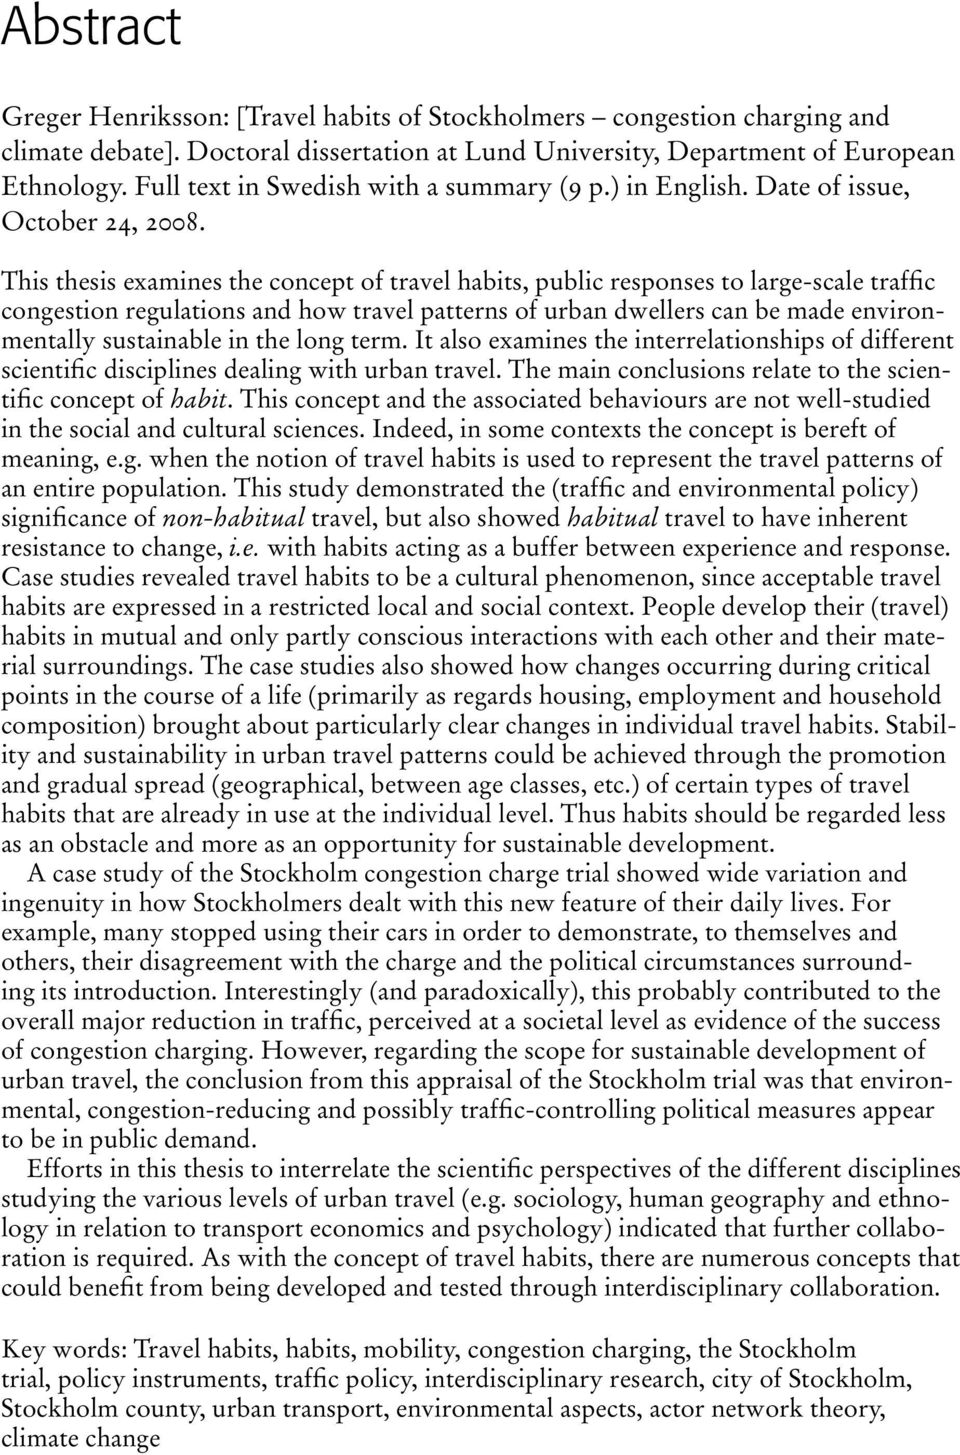 This thesis examines the concept of travel habits, public responses to large-scale traffic congestion regulations and how travel patterns of urban dwellers can be made environmentally sustainable in